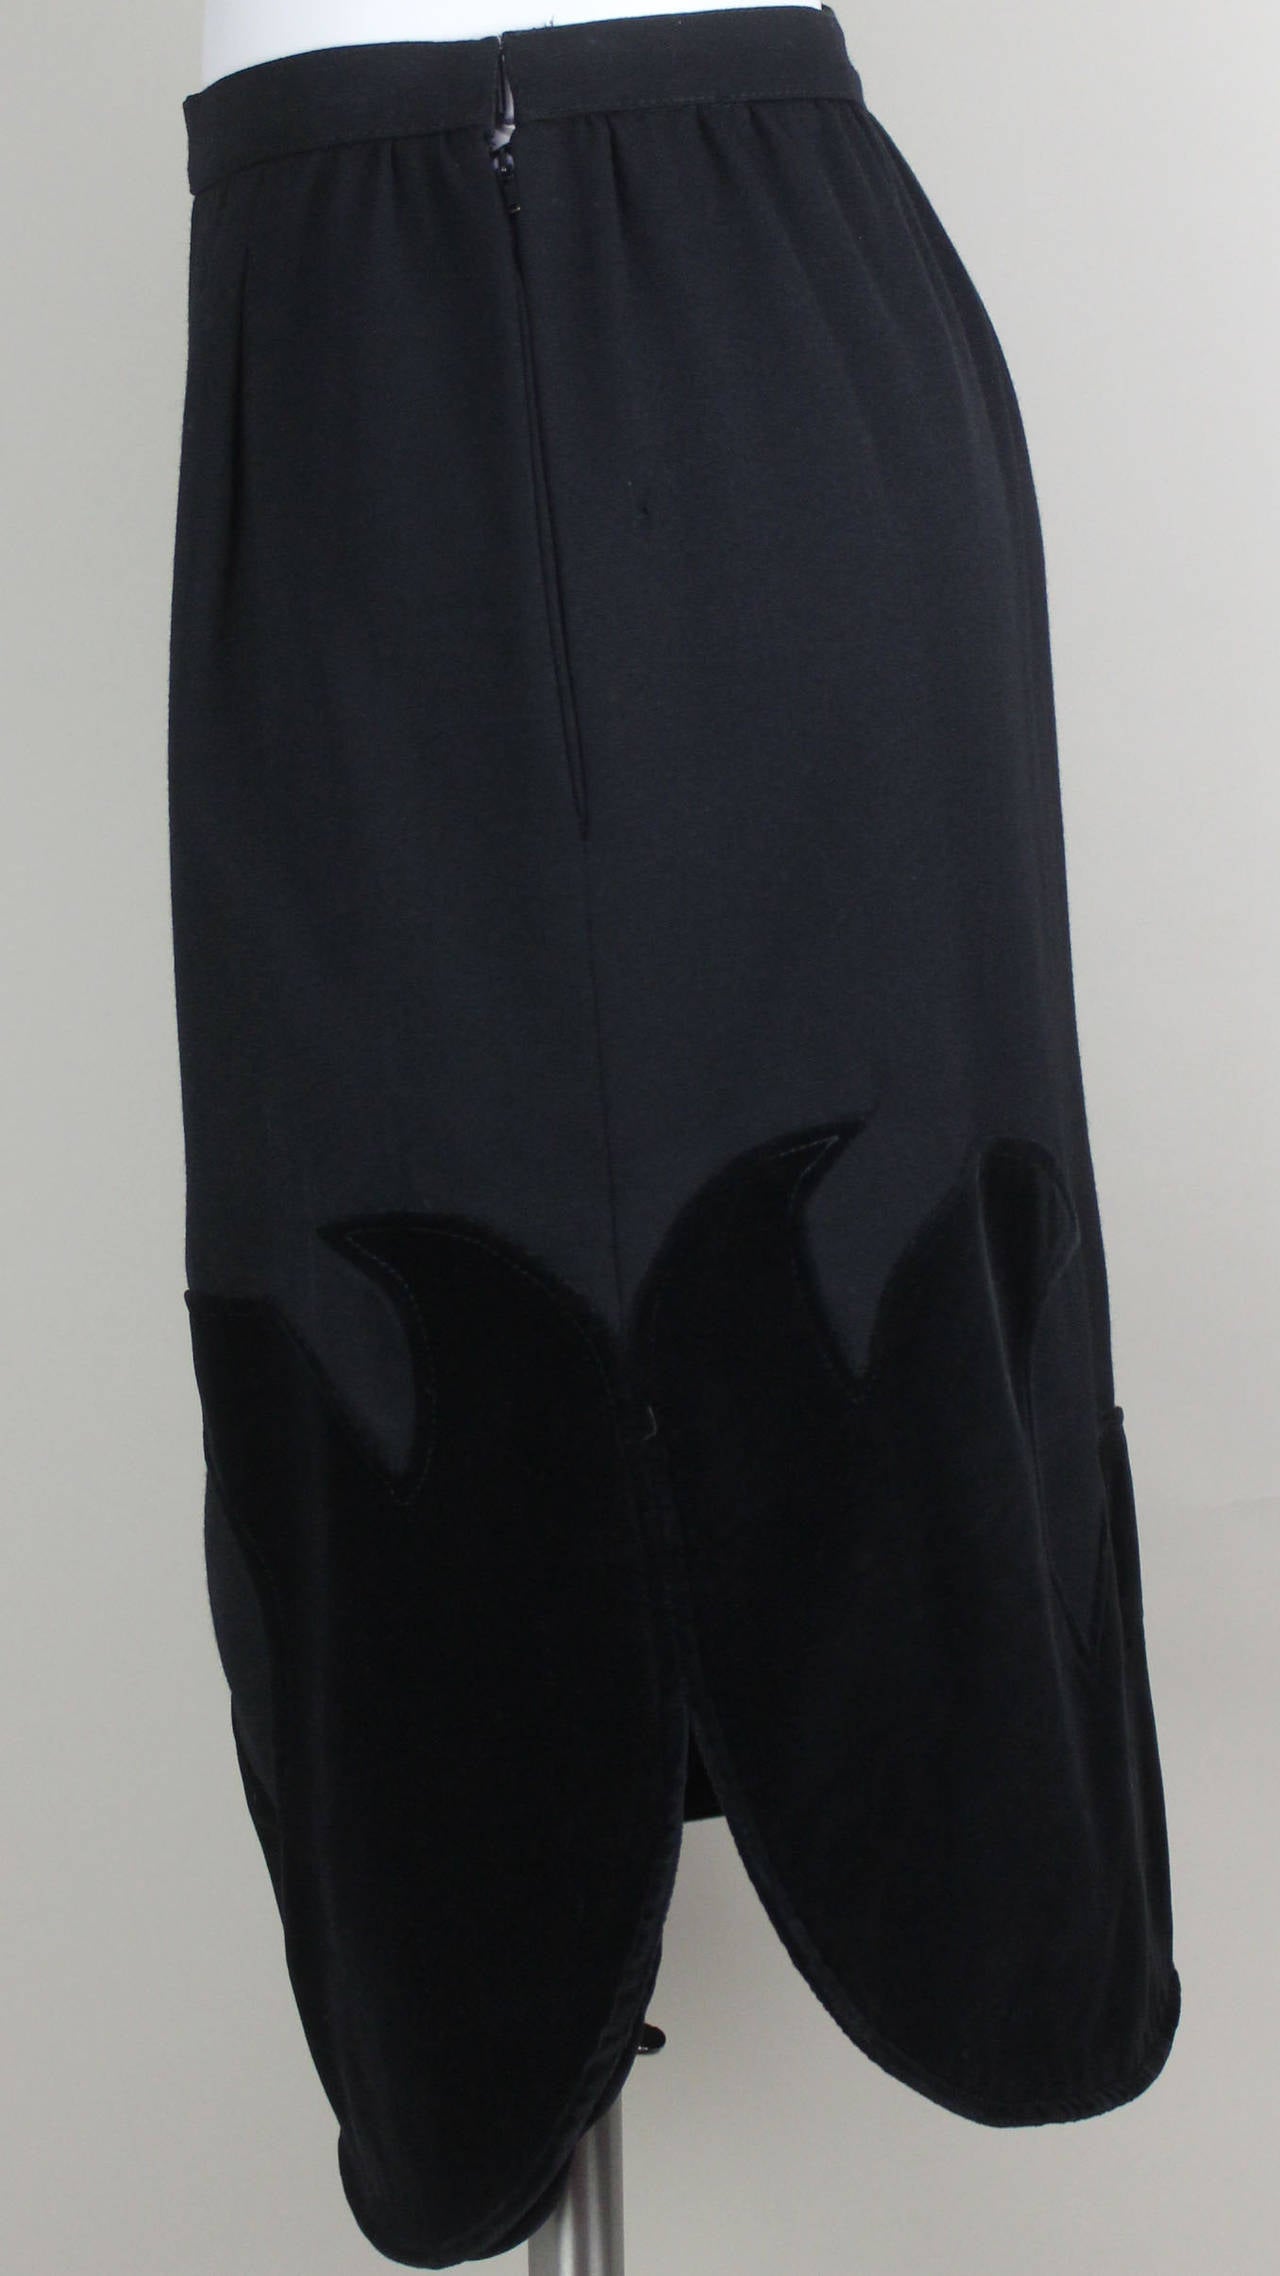 Black 1960s Valentino Boutique Cocoon Shaped Wool Skirt with Velvet Waves